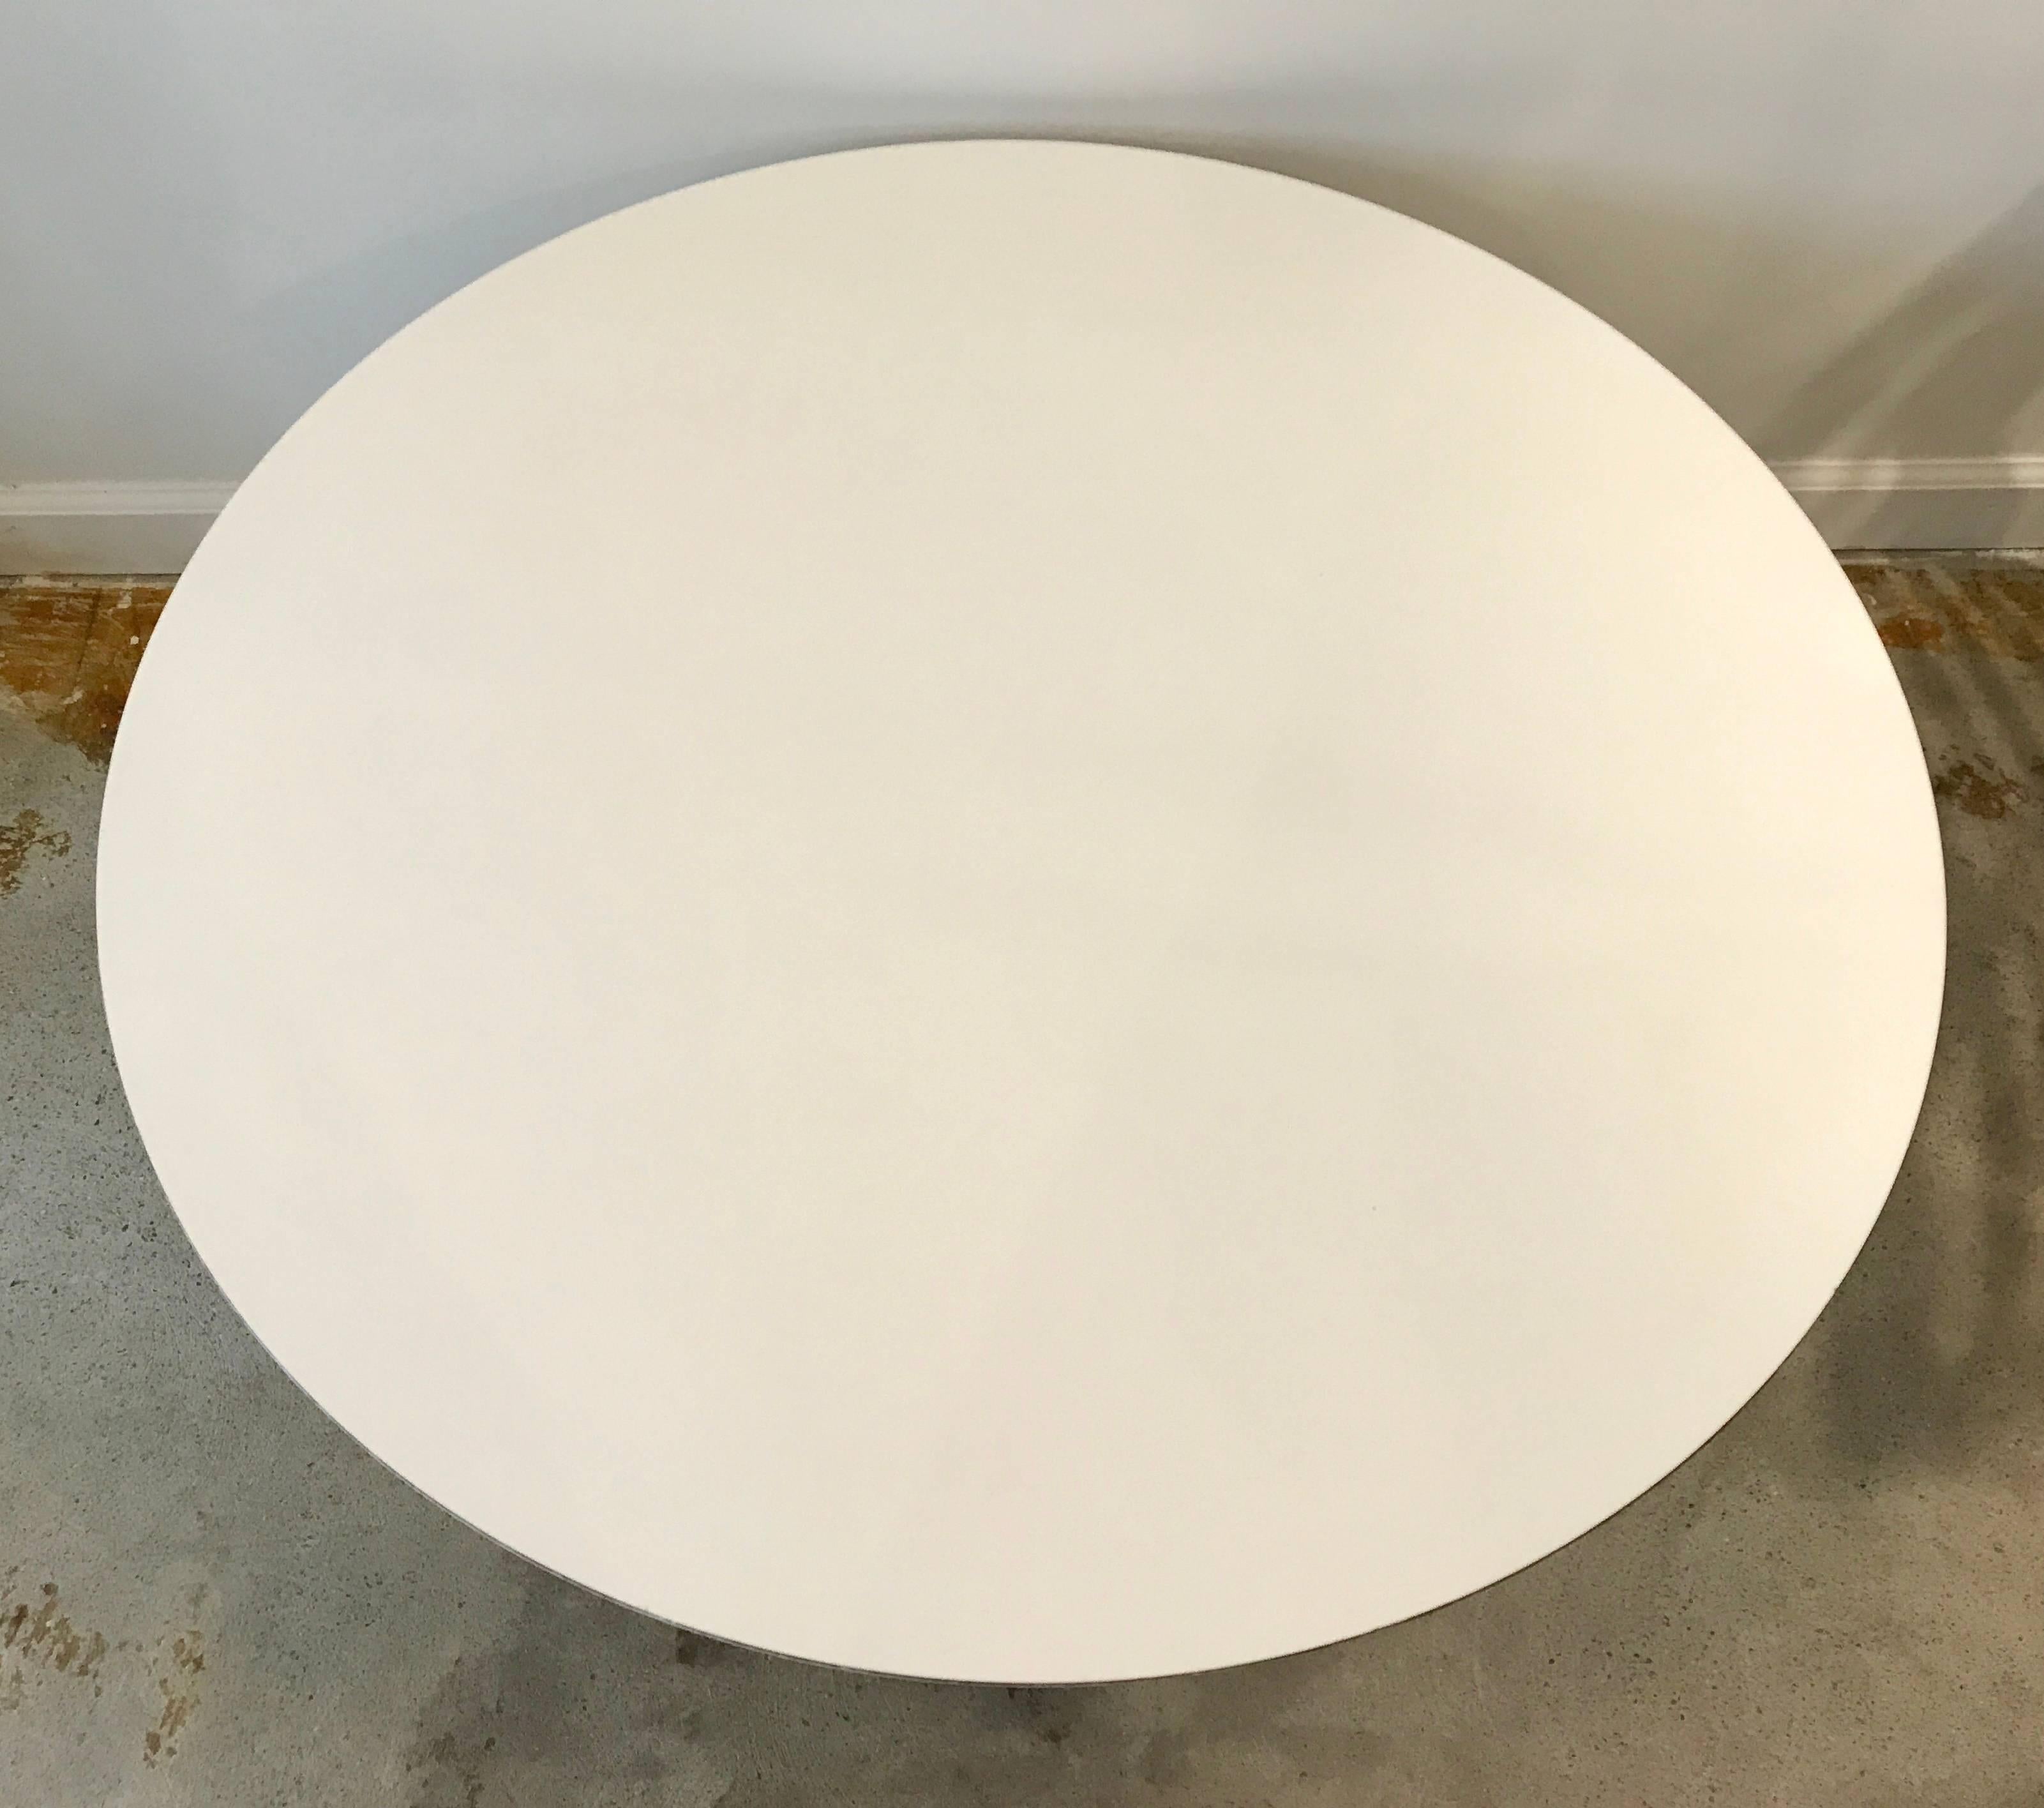 Early Eero Saarinen for Knoll cast iron tulip base coffee table with white laminate top, the grey colored base is quite rare. The laminate top is in good condition, the underside and sides show wear, but all original. The cast iron base has two